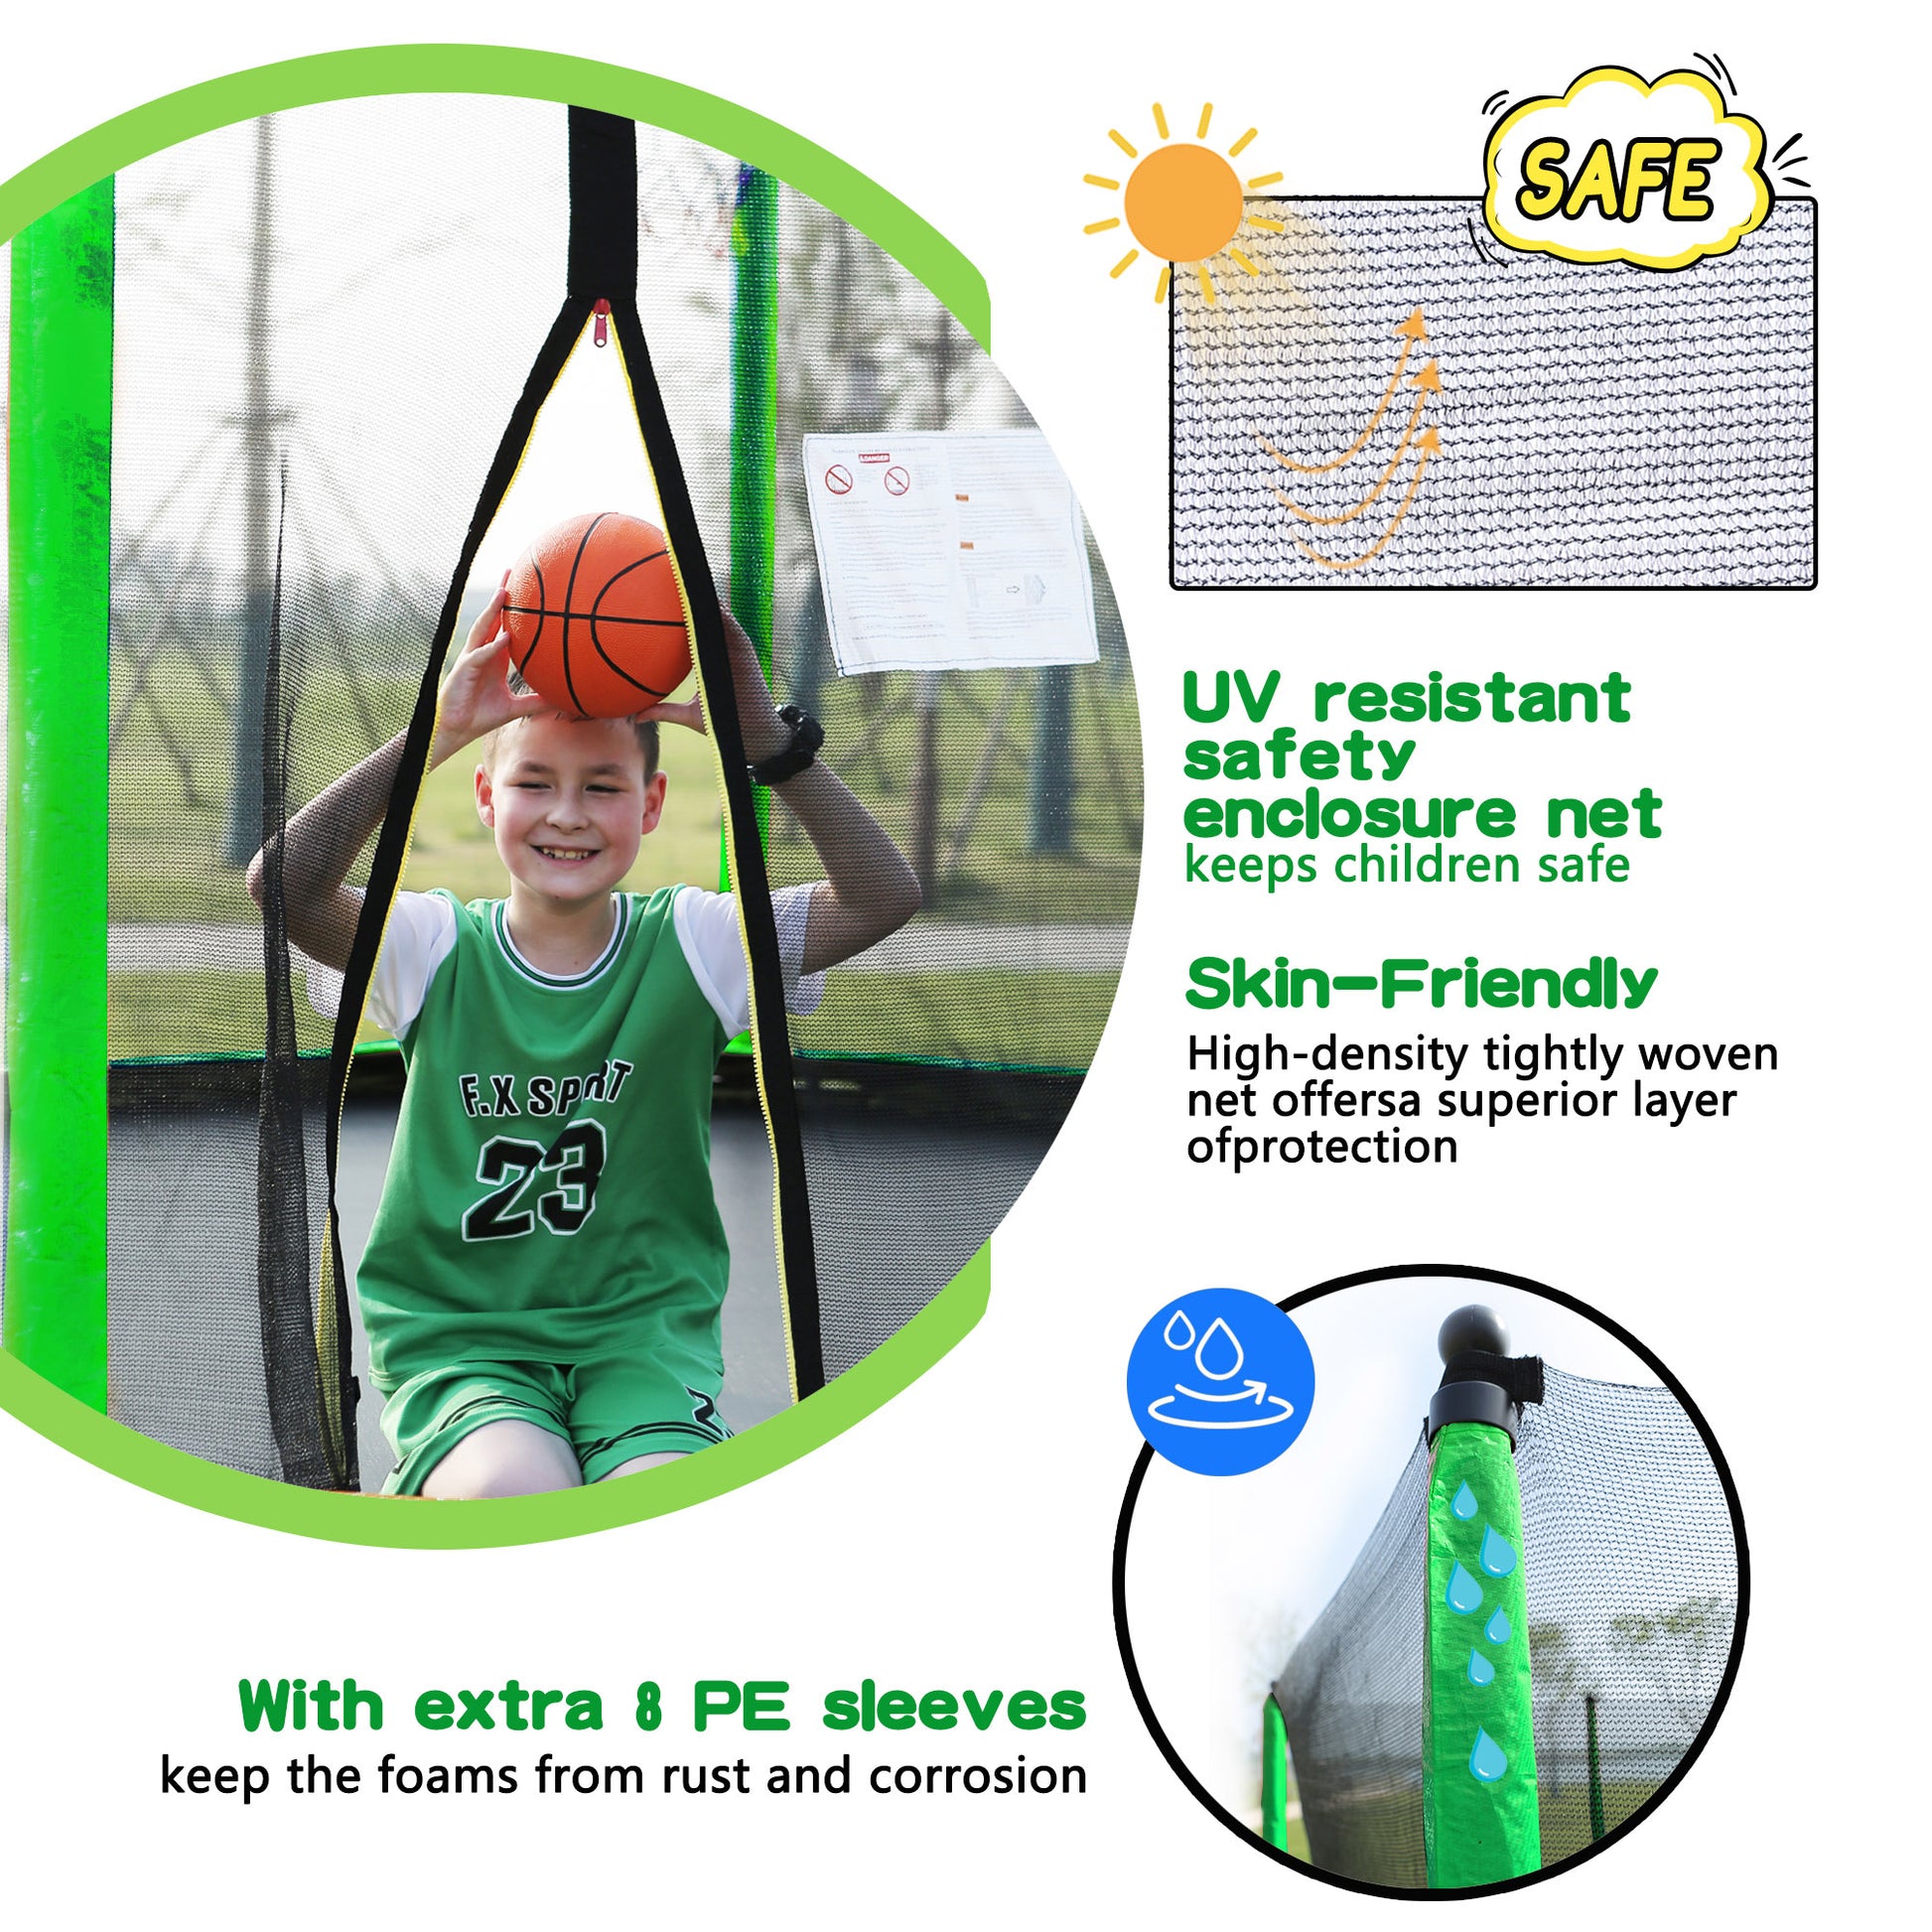 The boy is sitting on a orange trampoline and holding a basketball with the text next to it saying: UV resistant safety enclosure net keeps children safe, skin-friendly, with extra 8 pe sleeves